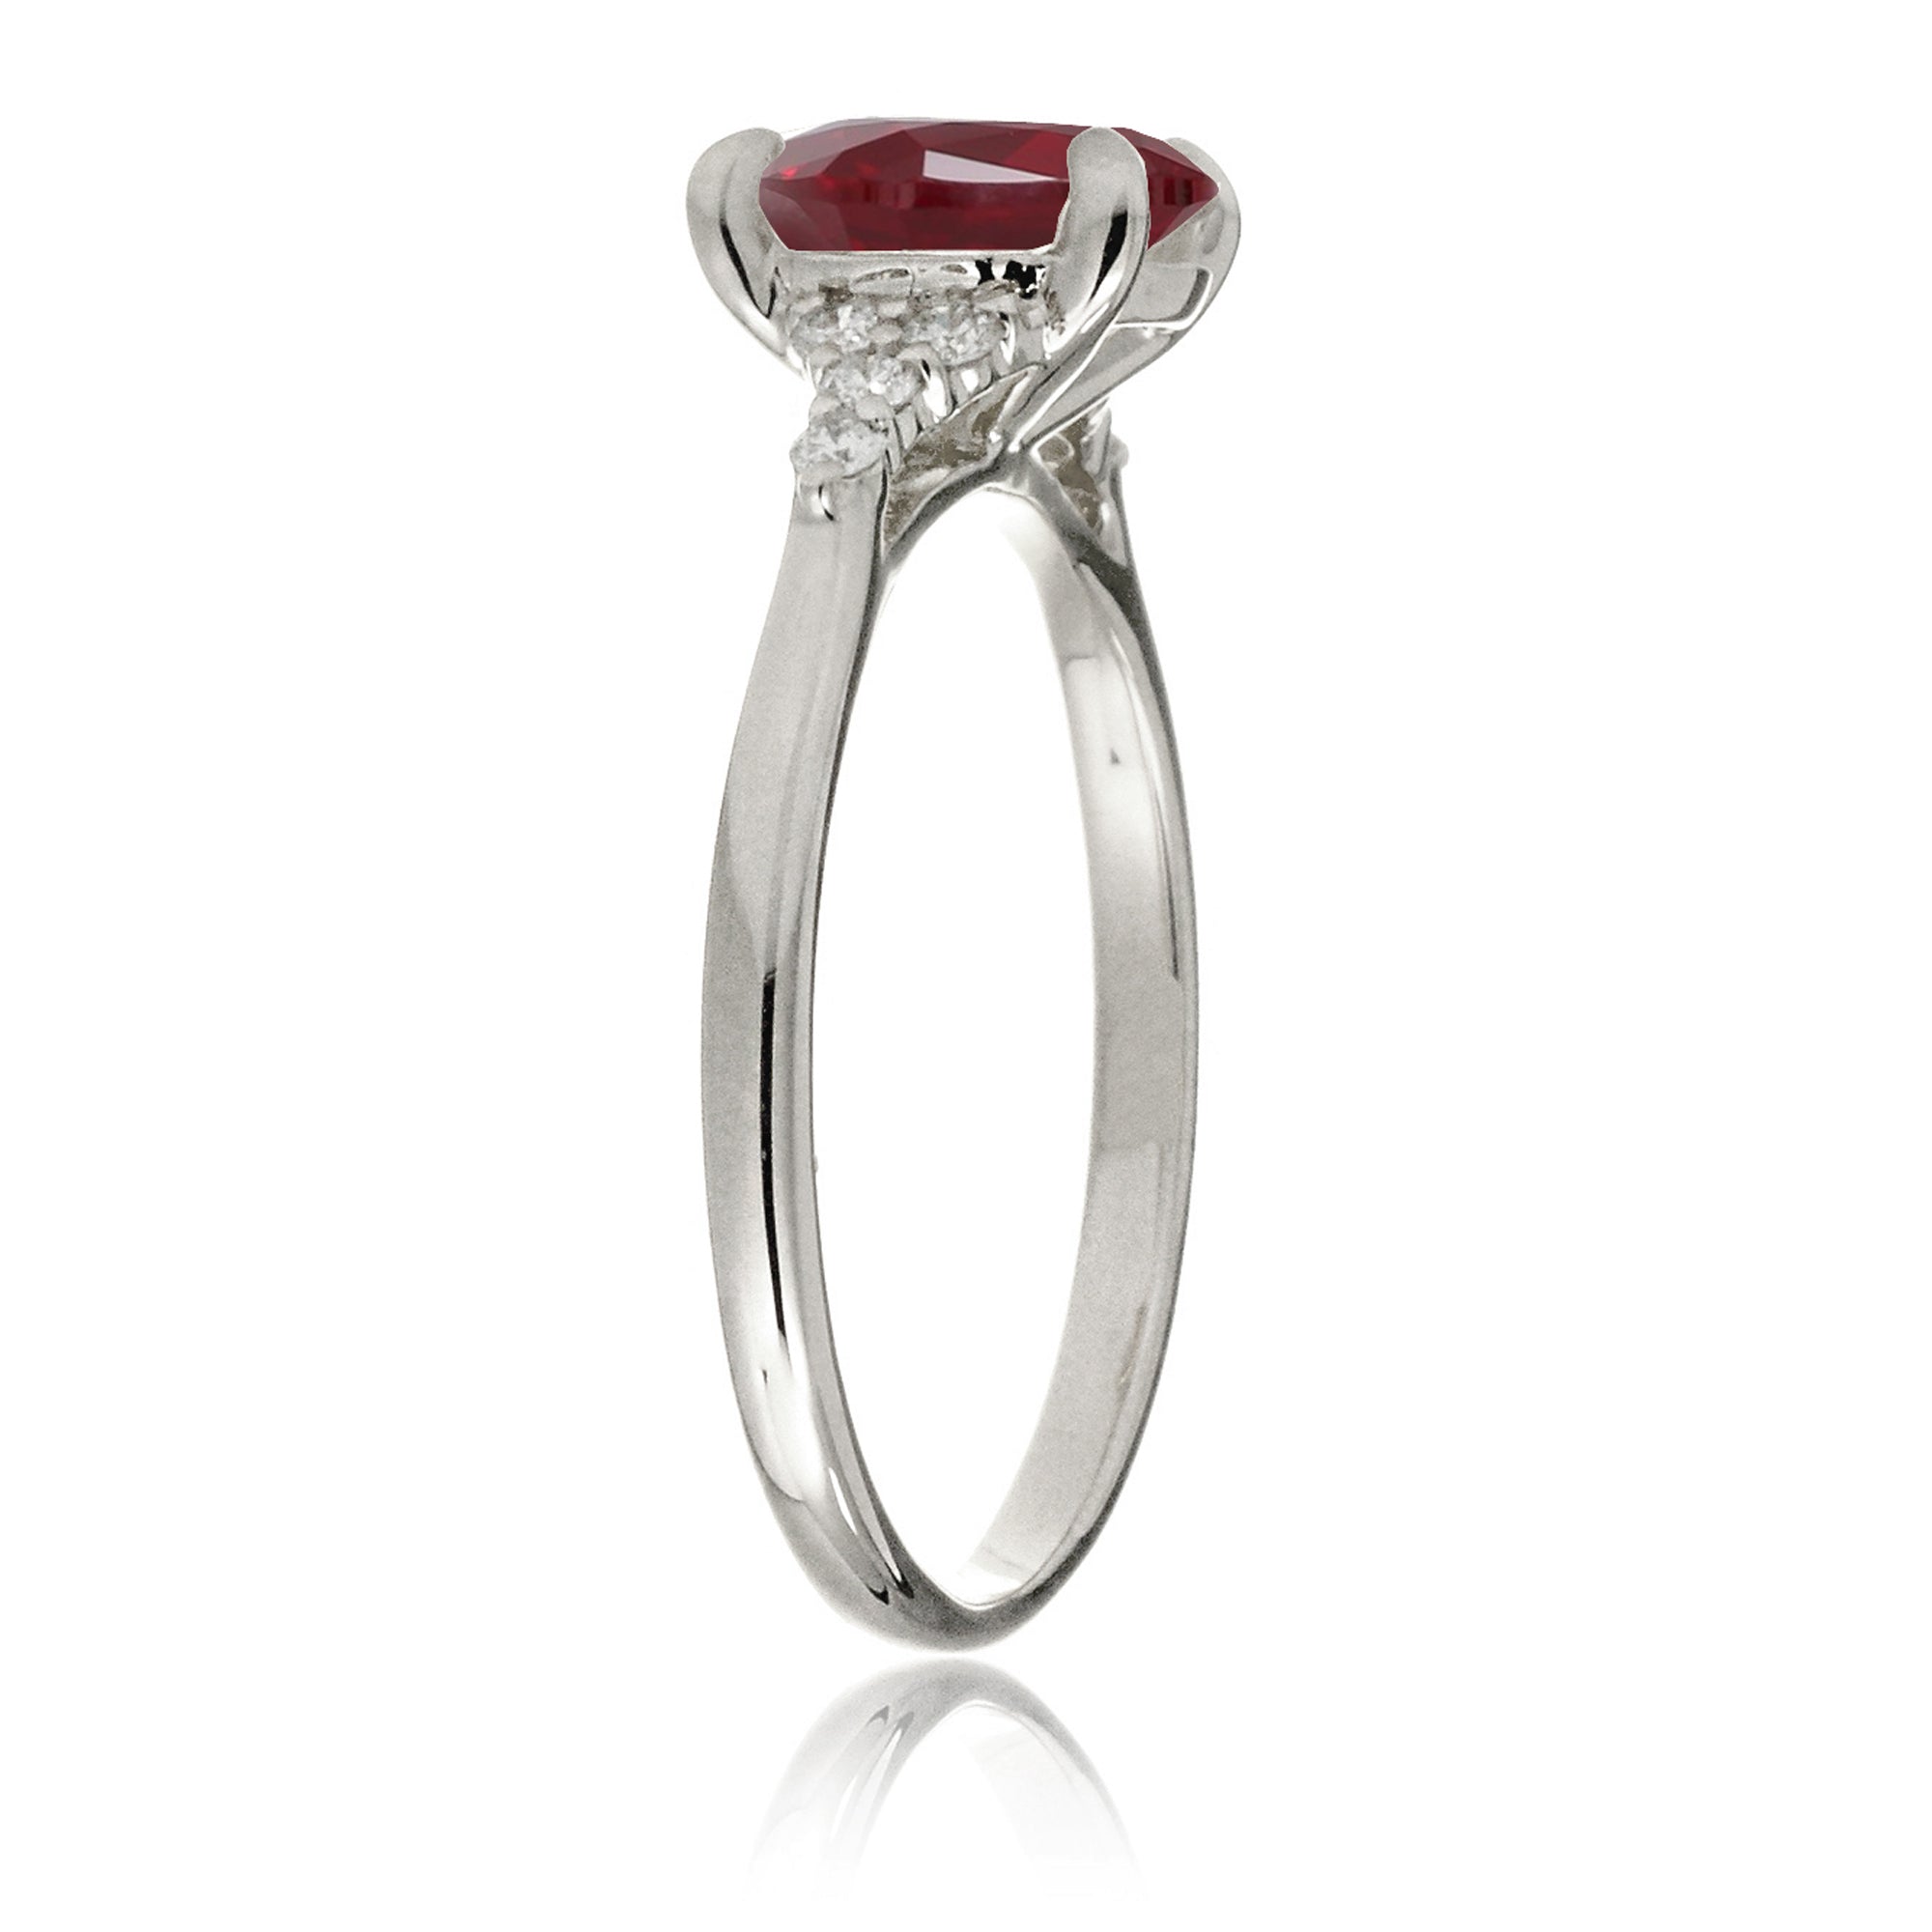 Oval ruby ring in white gold with side diamonds all natural - the Chloe ring